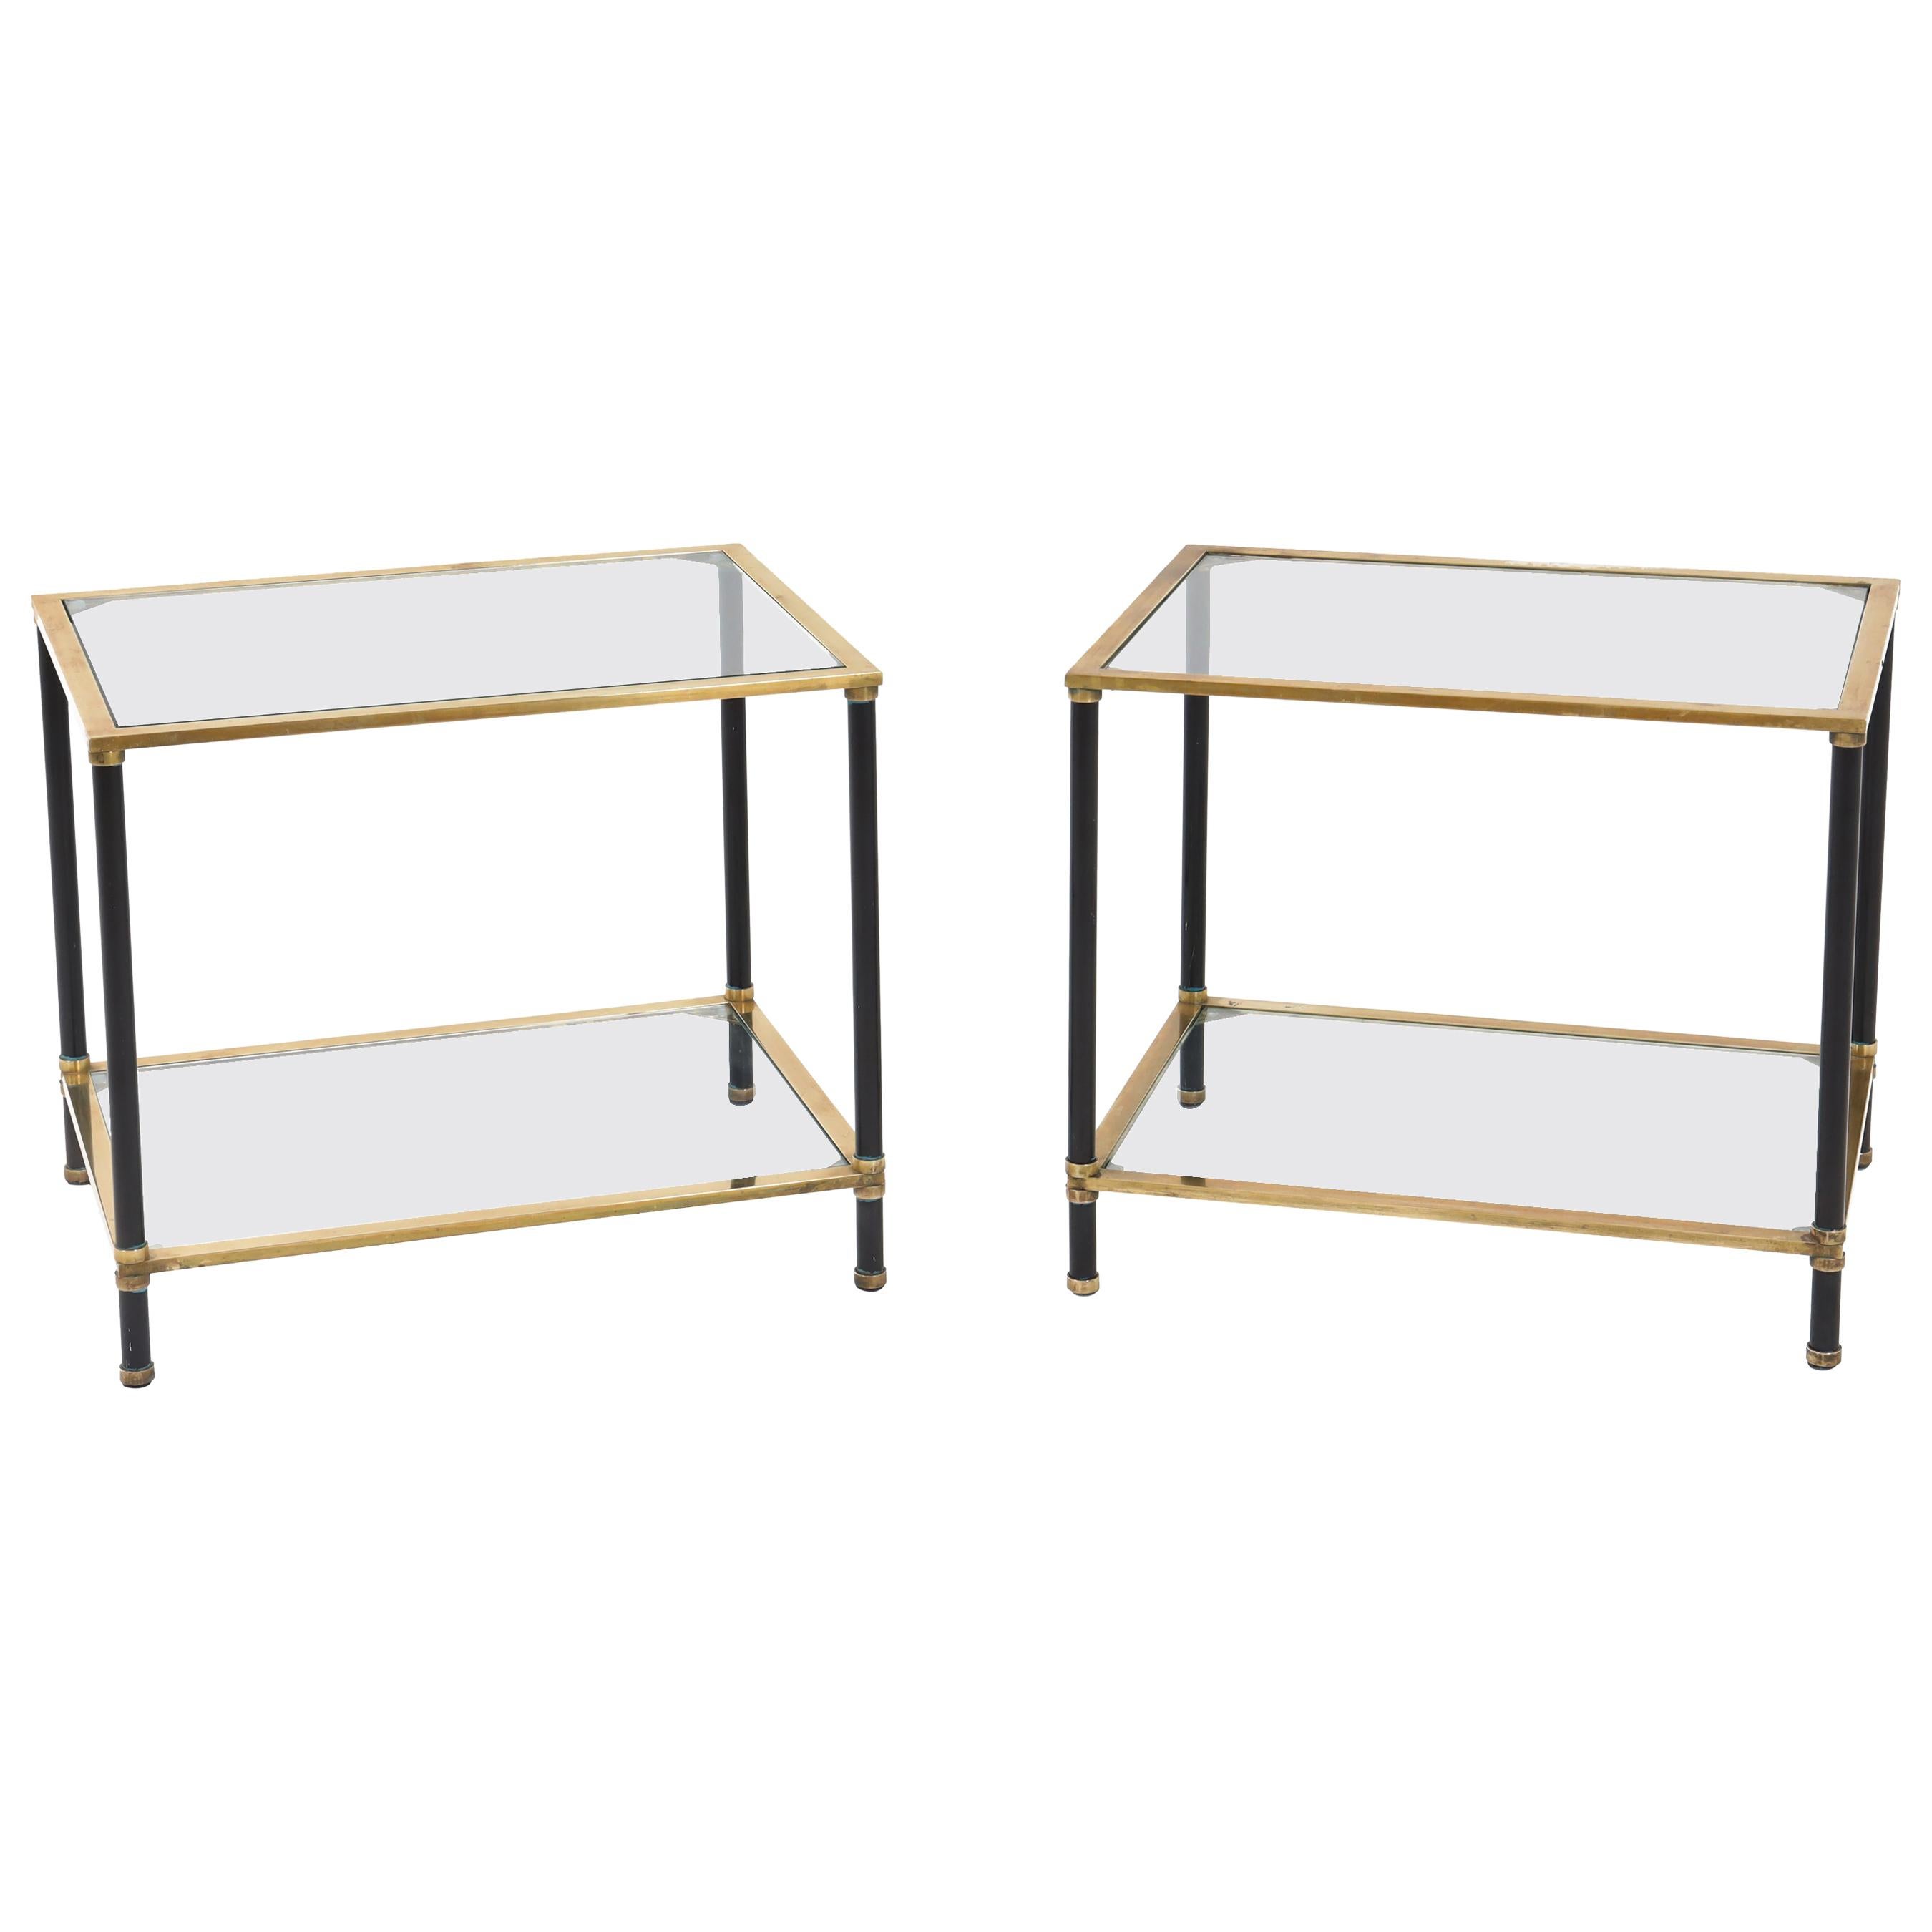 Pair of Italian Modernist Two Tier Side Tables